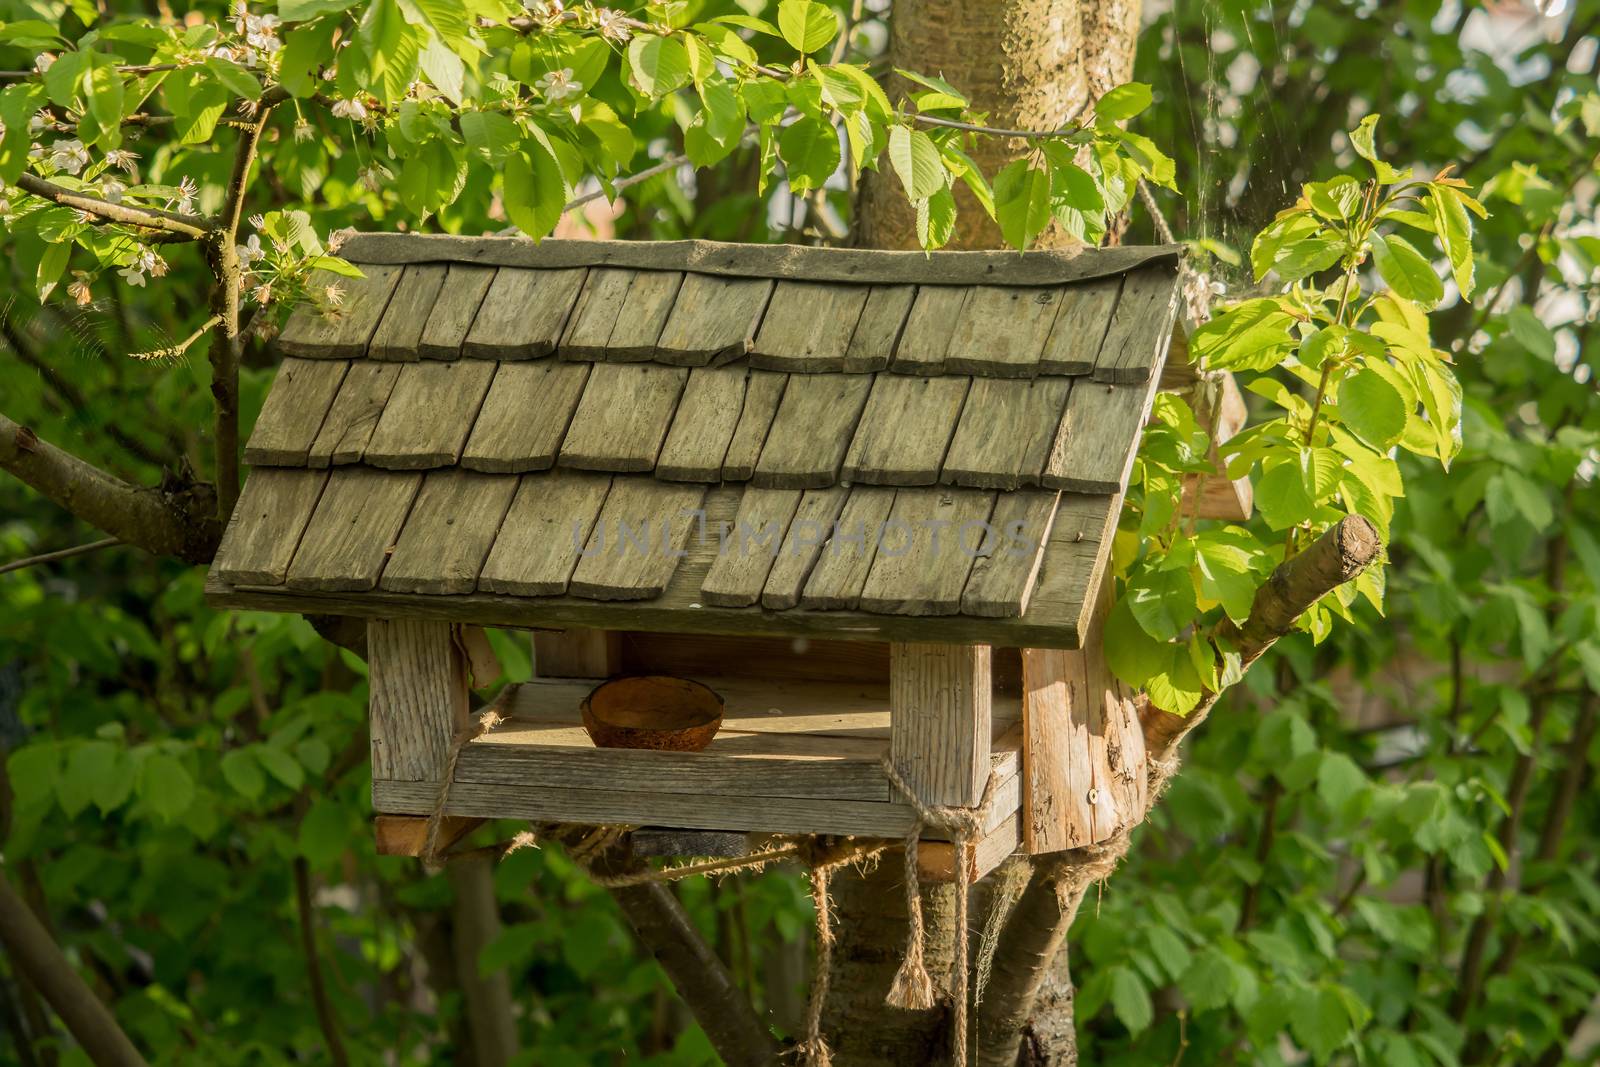 A small birdhouse hangs on the tree